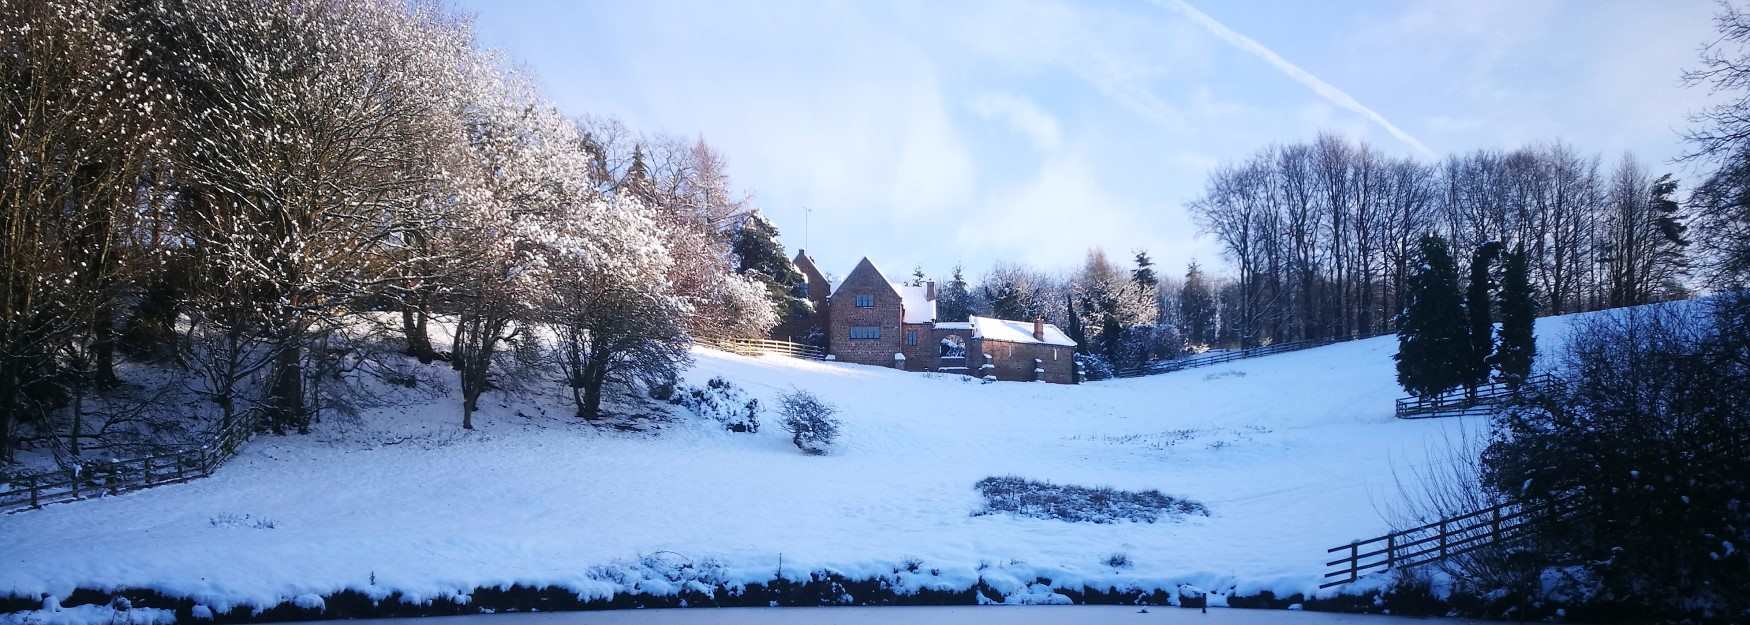 Heath Farm Holiday Cottages in the snow